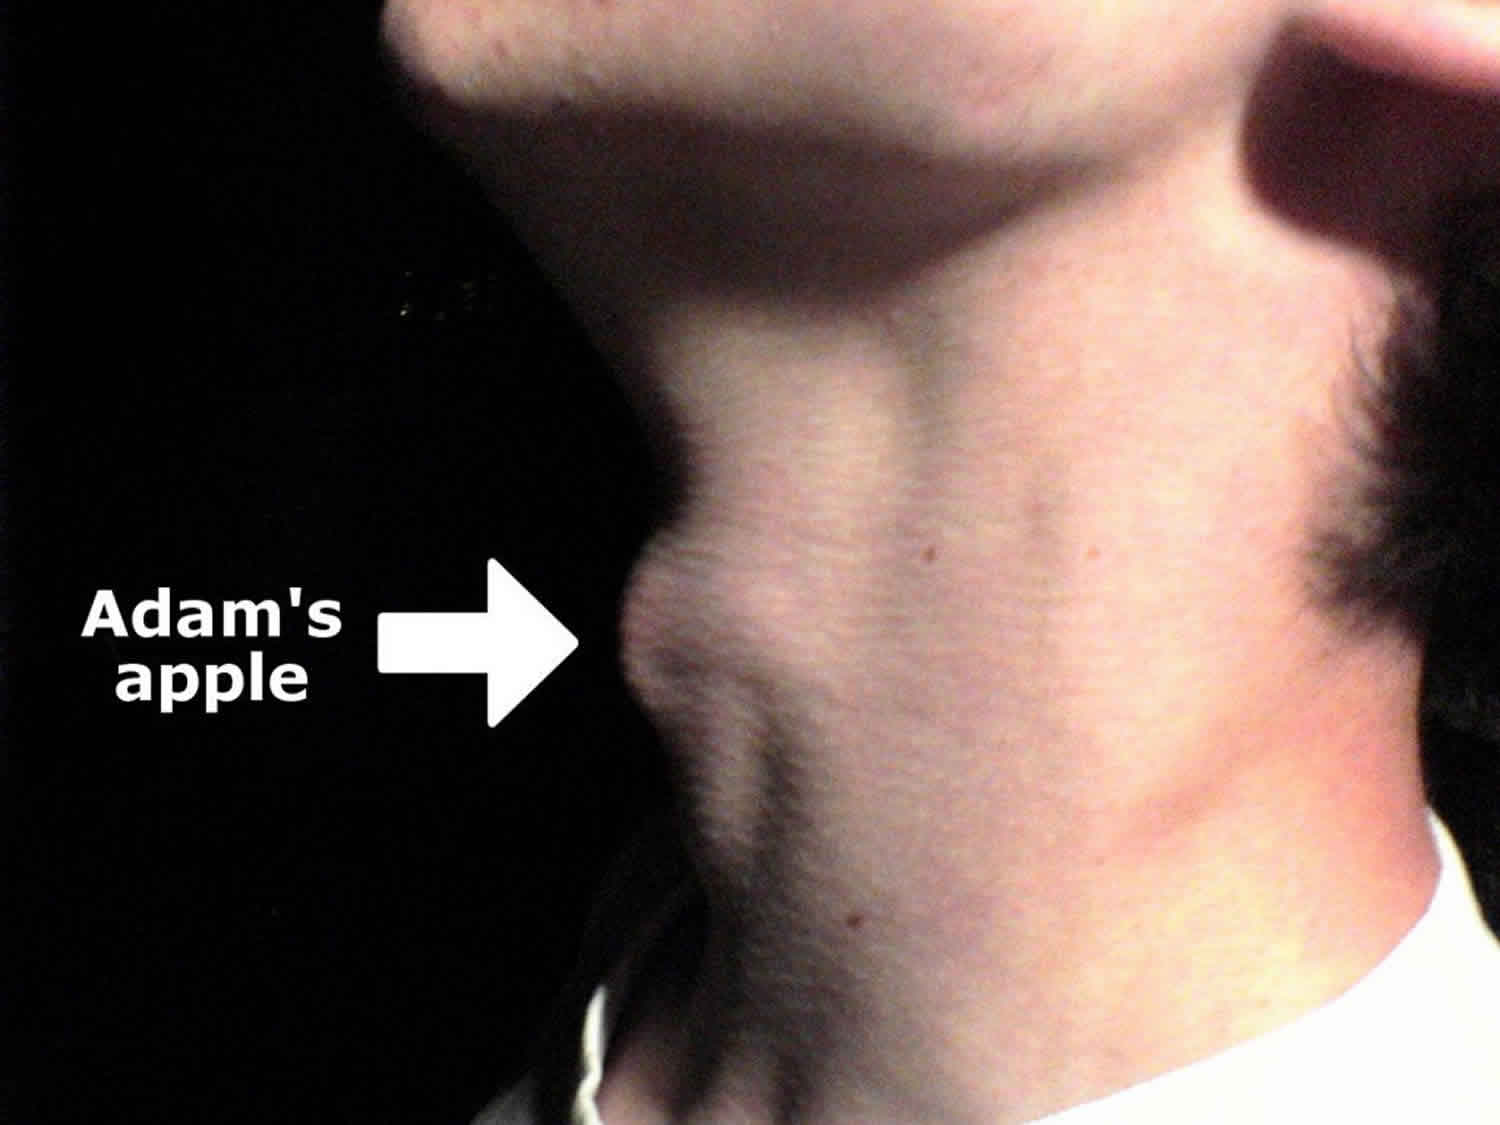 how did the adams apple get its name and where does the term adams apple come from